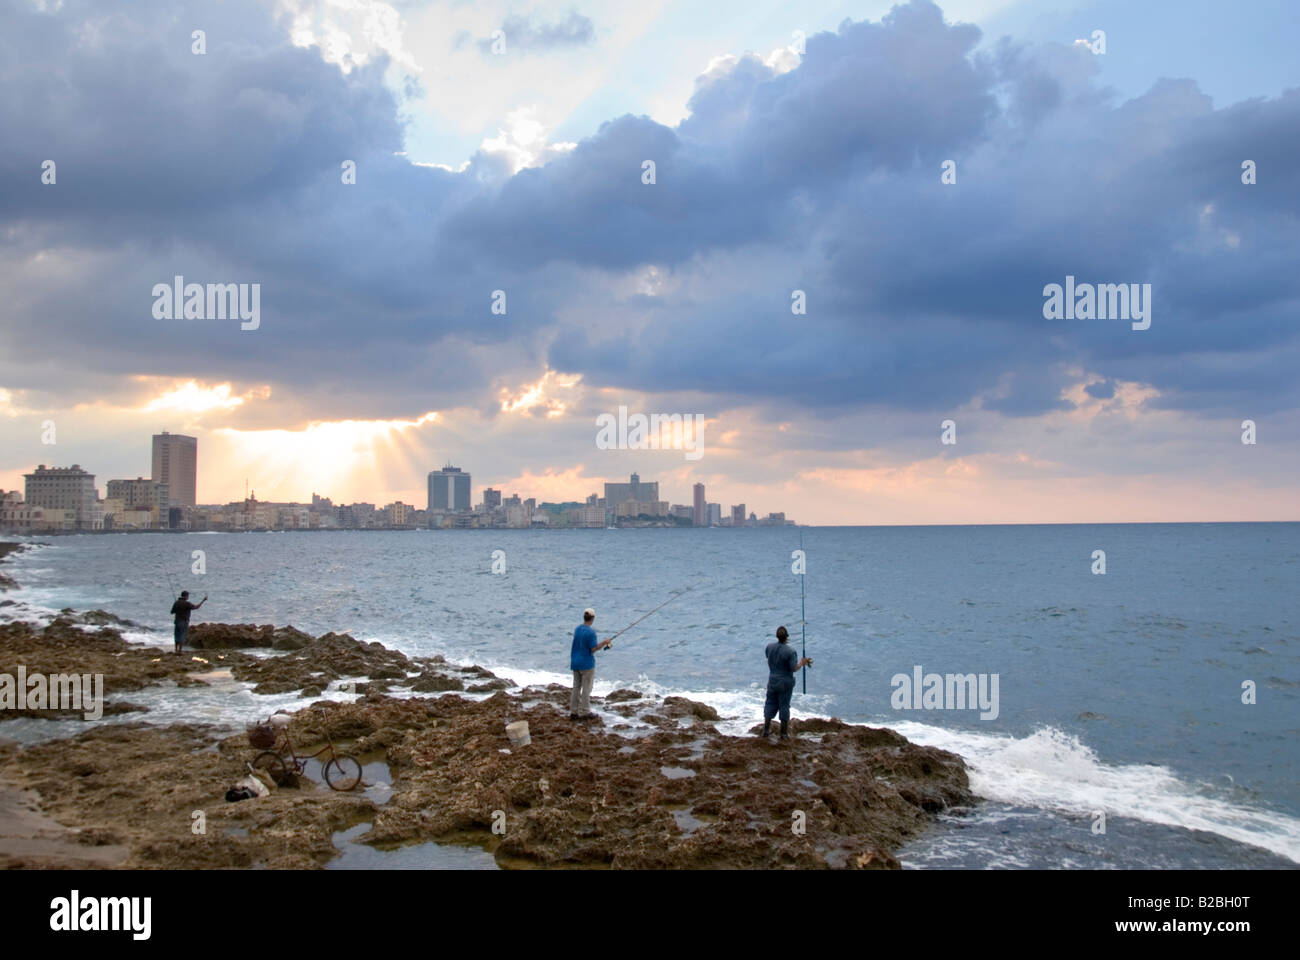 People fishing from El Malecon with view across the bay towards Vedado Havana Cuba Stock Photo